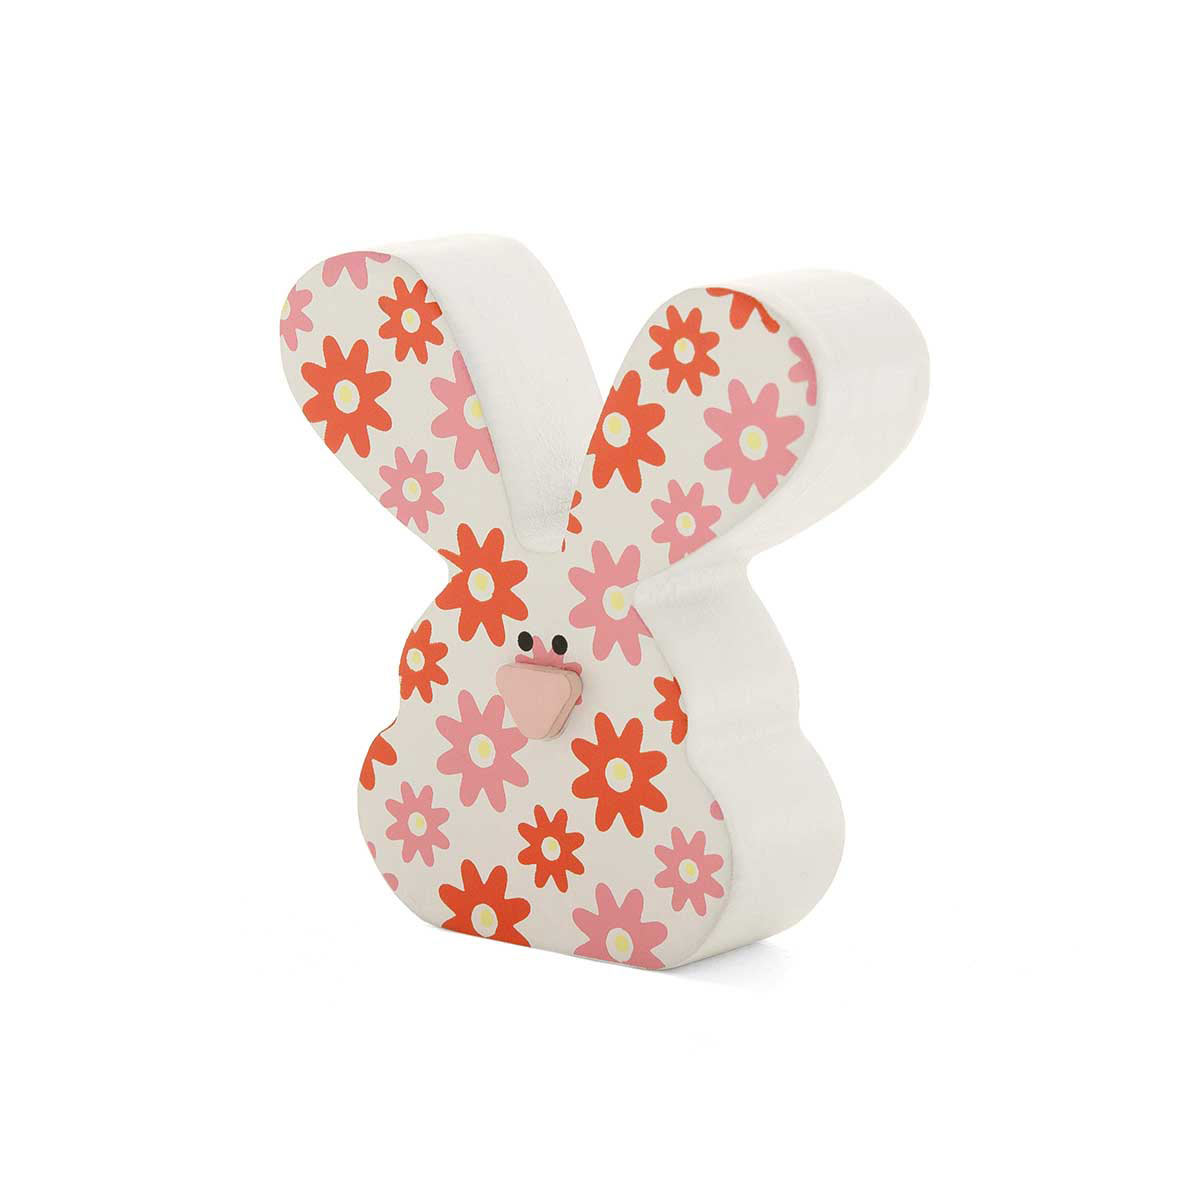 CORAL FAIR WOOD BUNNY SIT-A-BOUT CORAL/WHITE FLORAL